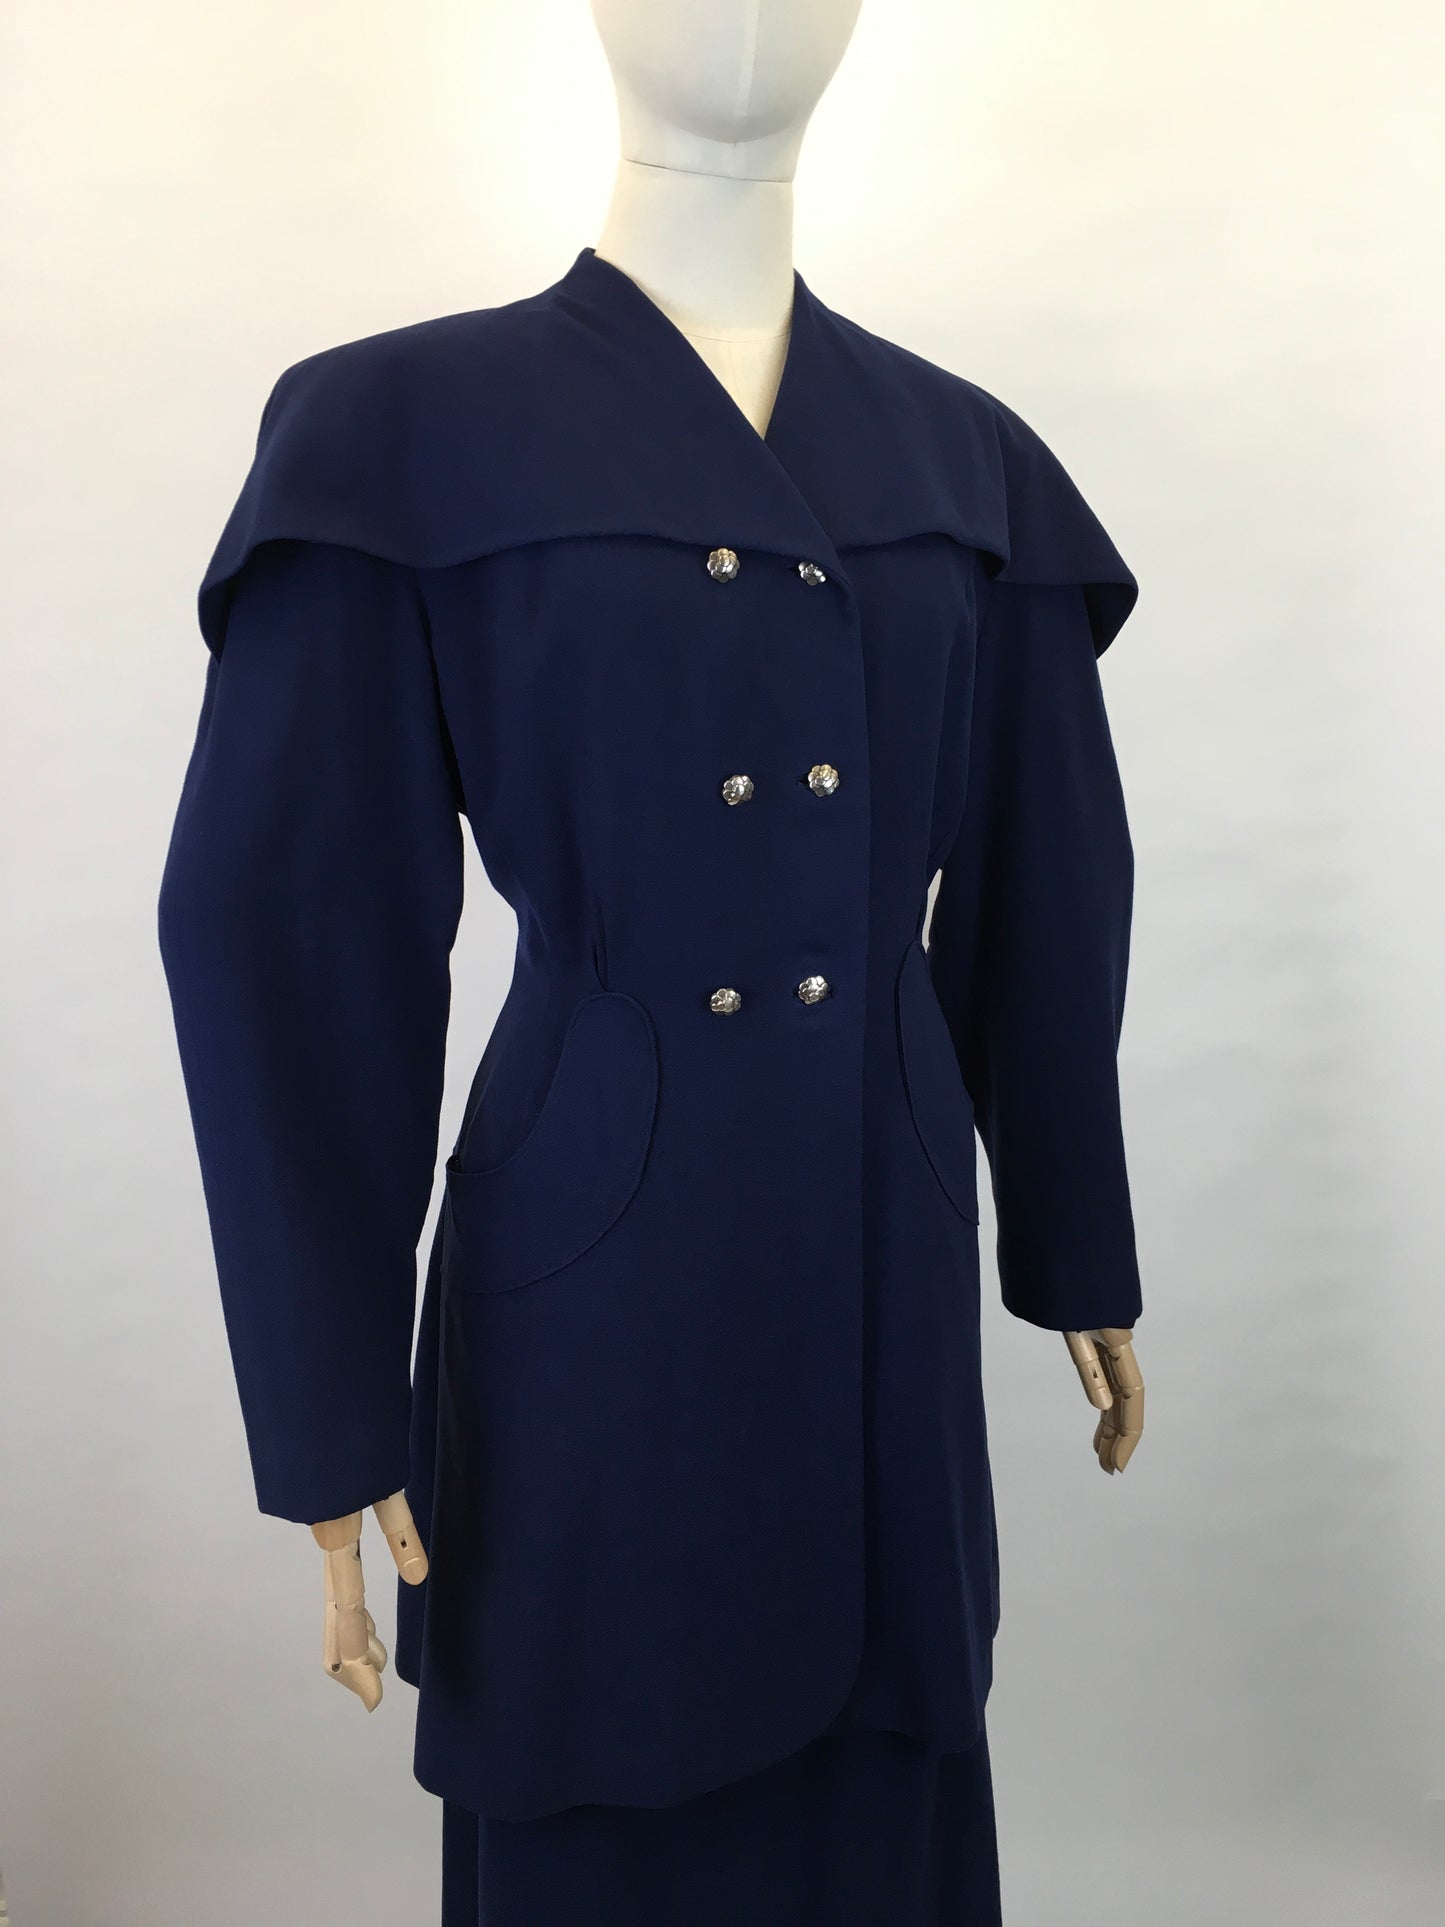 Original 1940s STUNNING Navy 2 pc Suit - With PHENOMENAL Long Line Silhouette and Cape Style Overlay